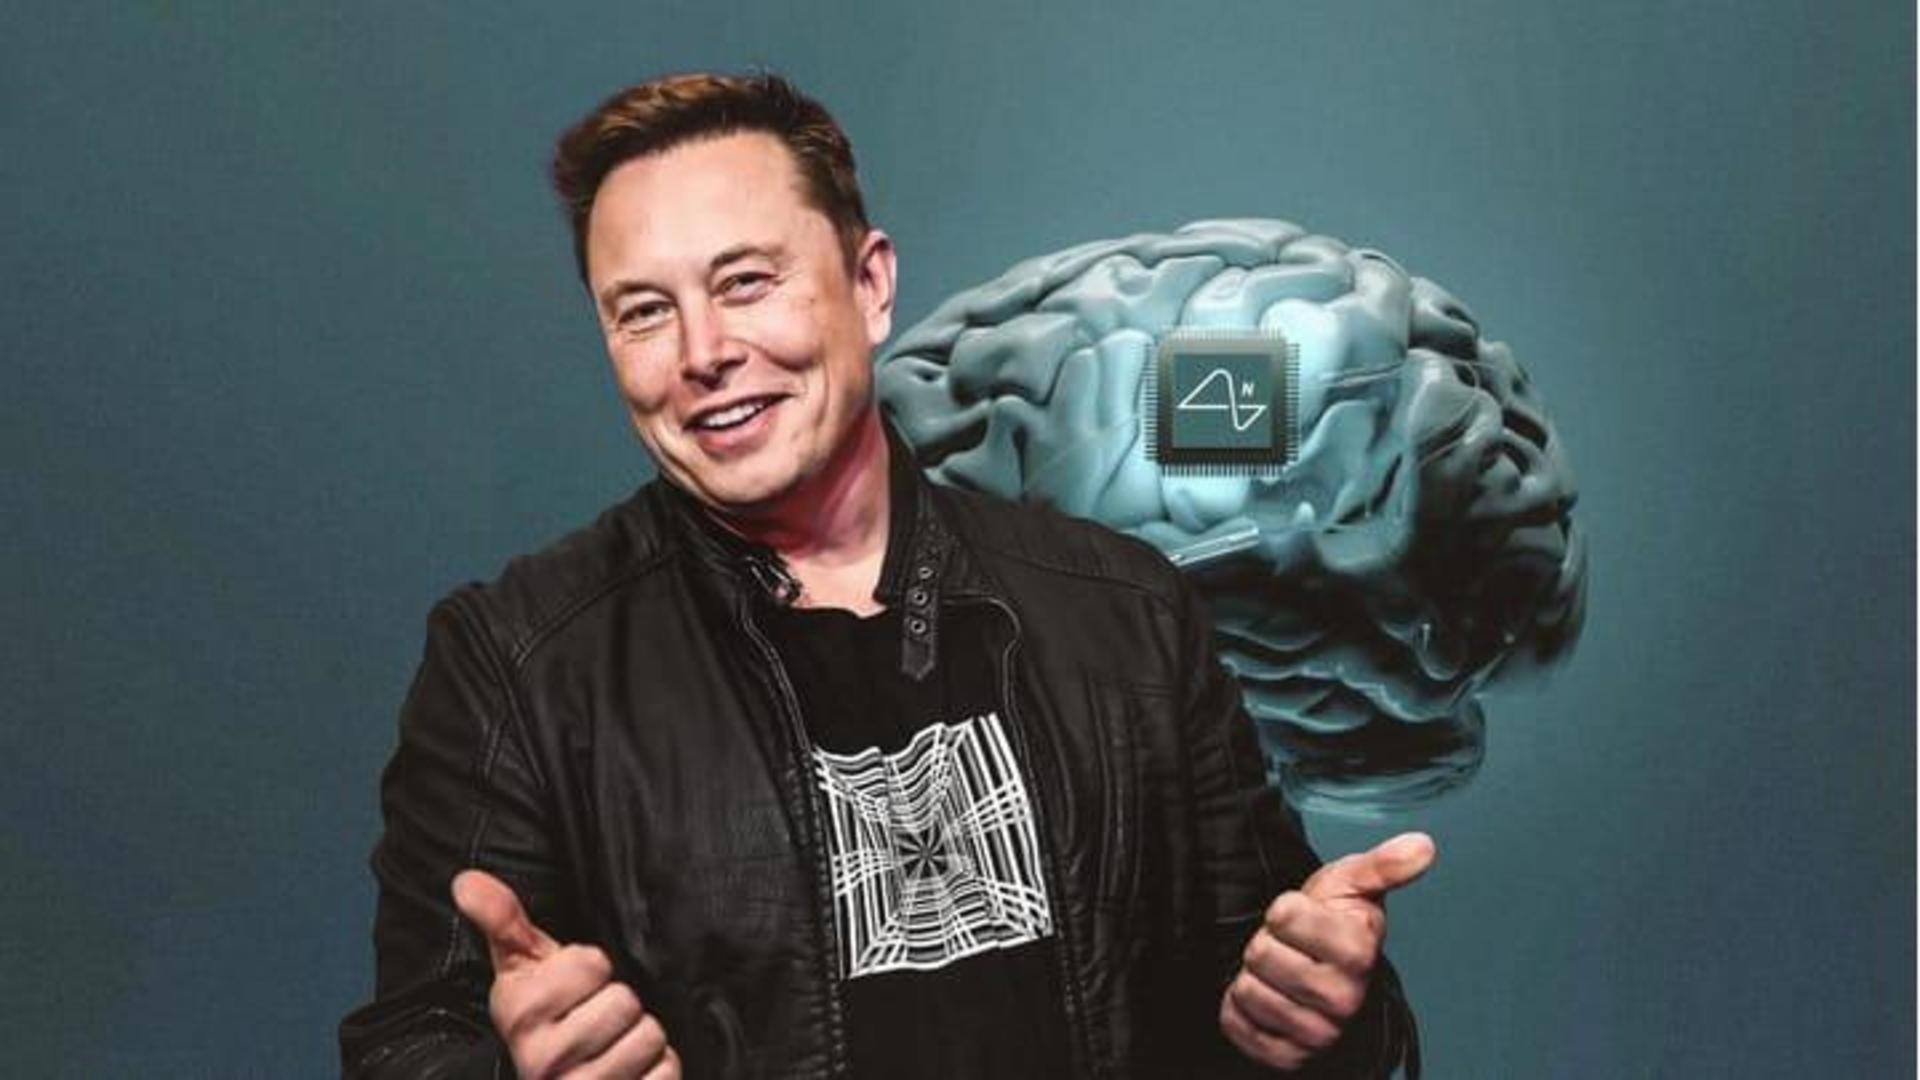 FDA approval boosts Elon Musk-owned Neuralink's valuation to $5 billion